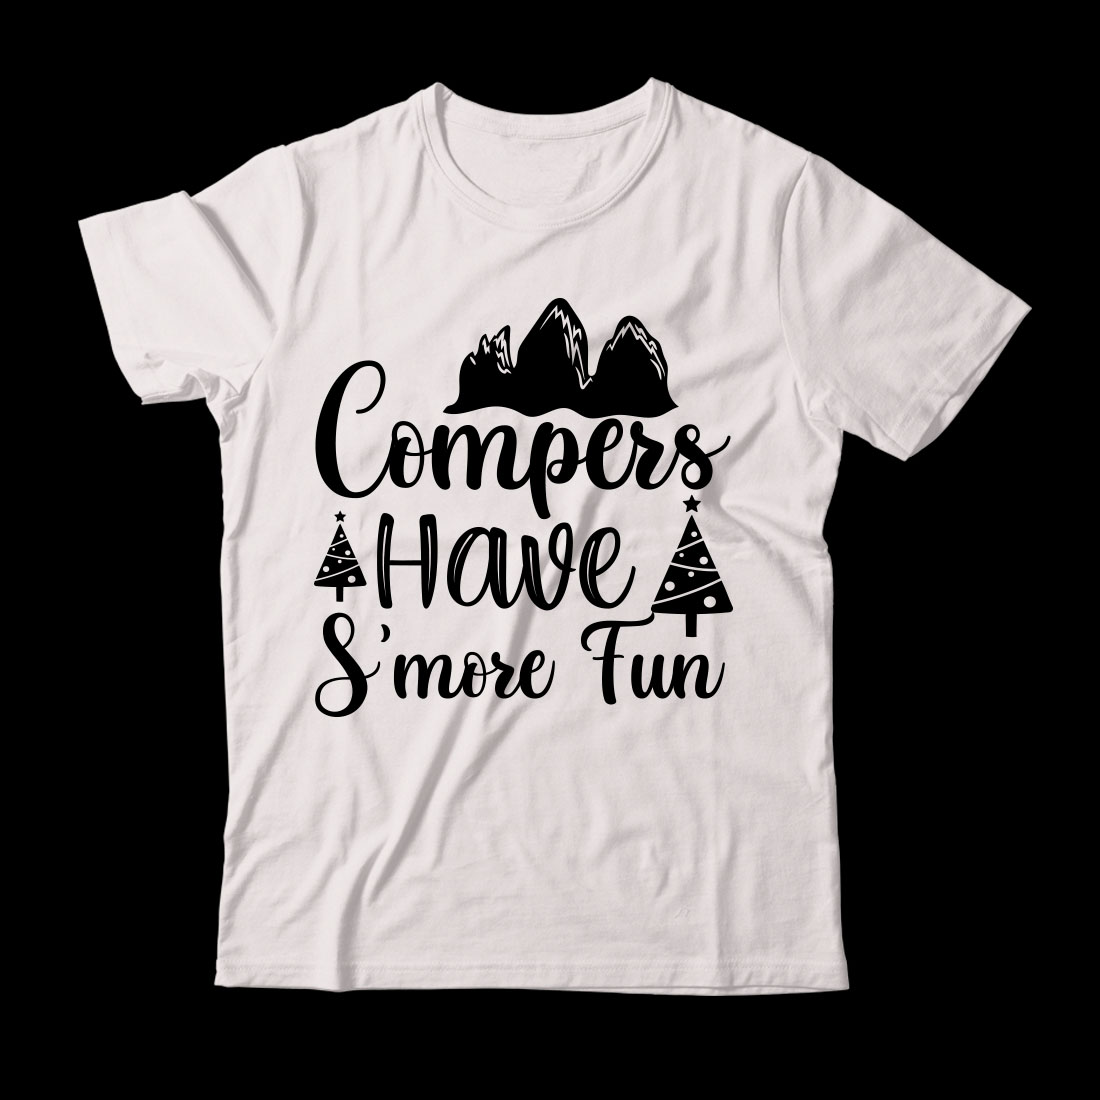 White t - shirt with the words campers have a s'more fun.